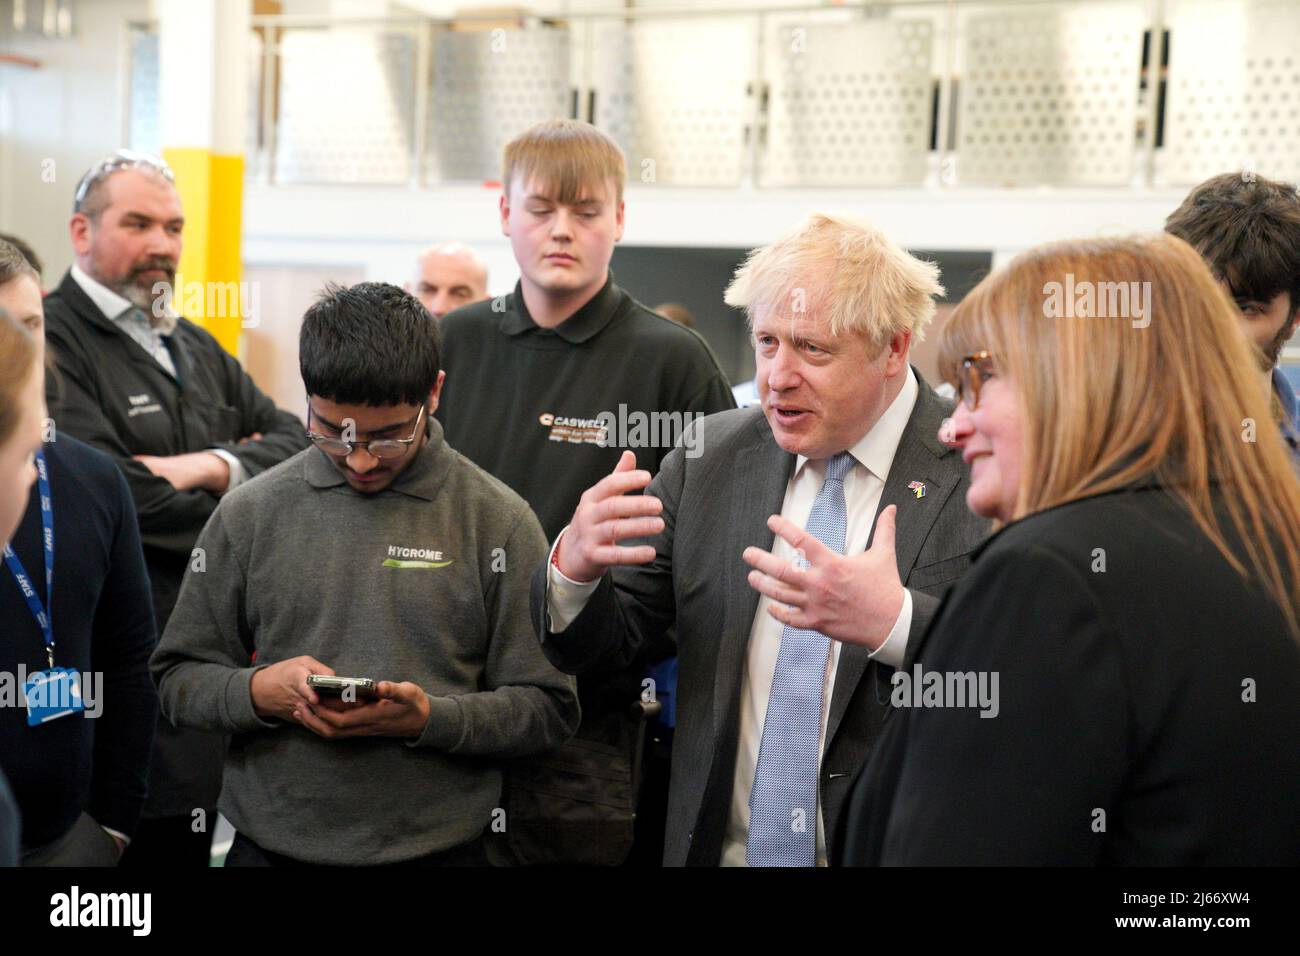 Britain's Prime Minister Boris Johnson meets students during a campaign visit to Burnley College Sixth Form Centre in Burnley, Lancashire, Britain April 28, 2022. Peter Byrne/Pool via REUTERS Stock Photo